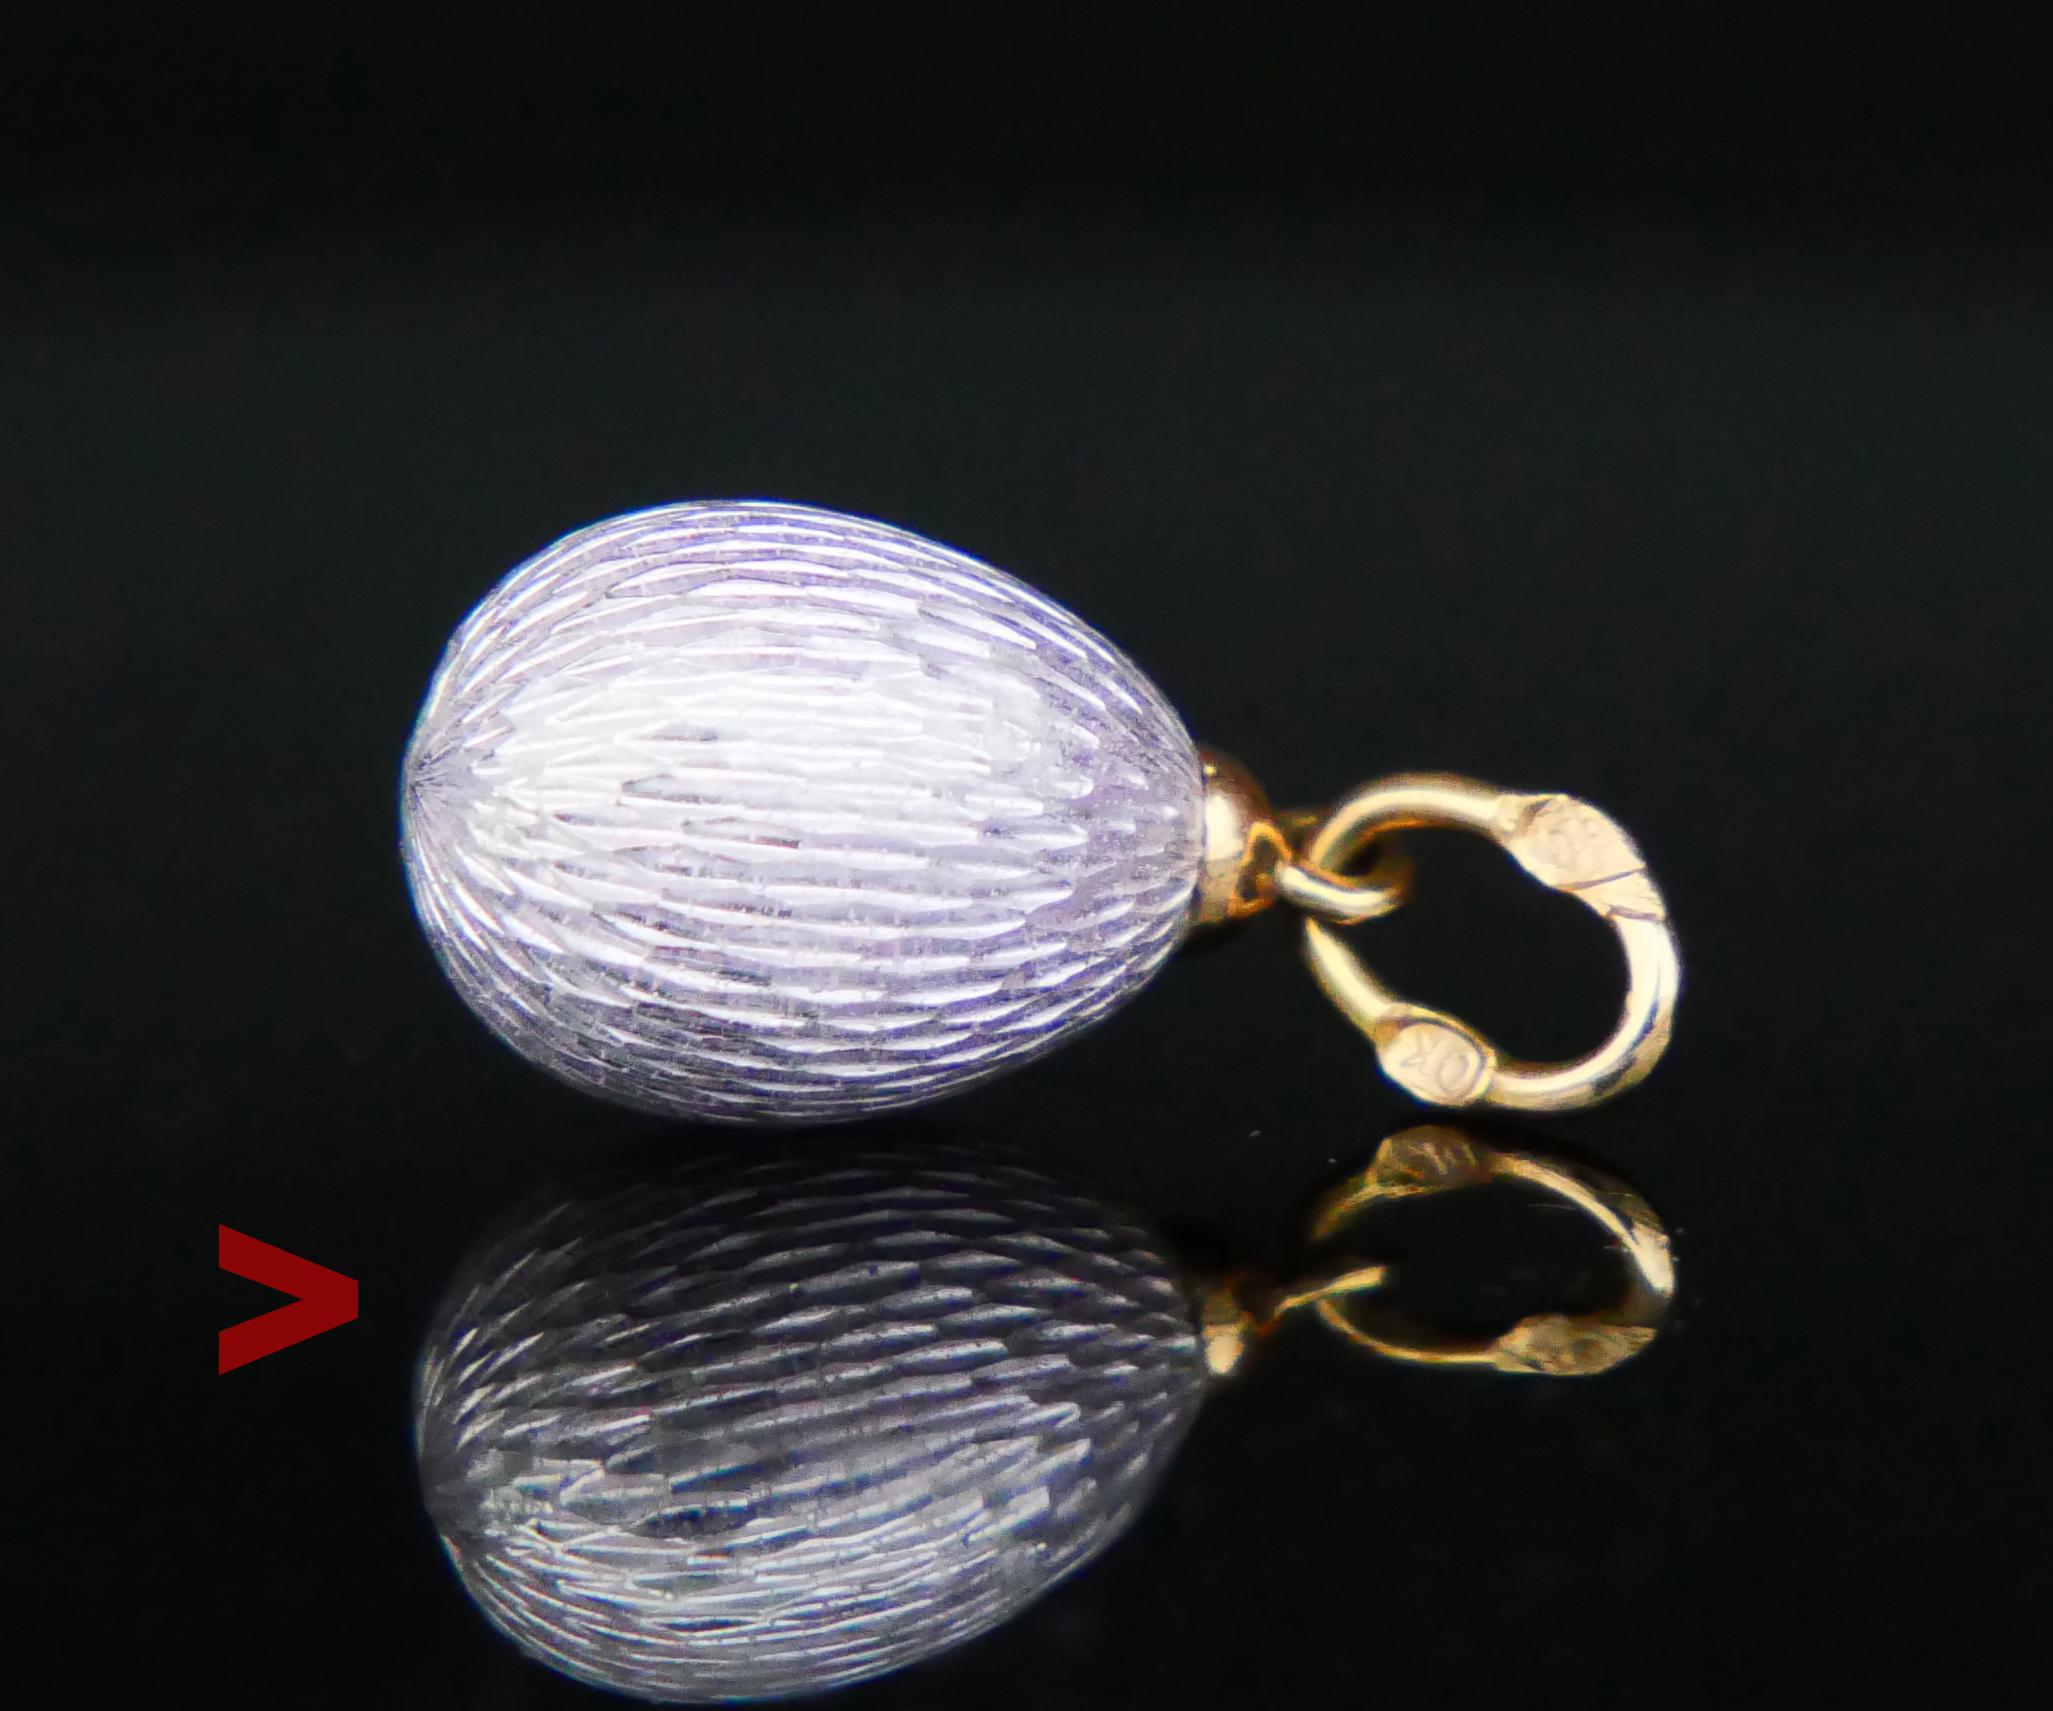 Antique miniature Passover Egg pendant made in Imperial Russia between years 1884 - 1916.

Body in Silver finished with fine translucent Guilloche Lavender toned Enamel and mounted on 14K Gold hanger.

Guilloché is a decorative technique in jewelry